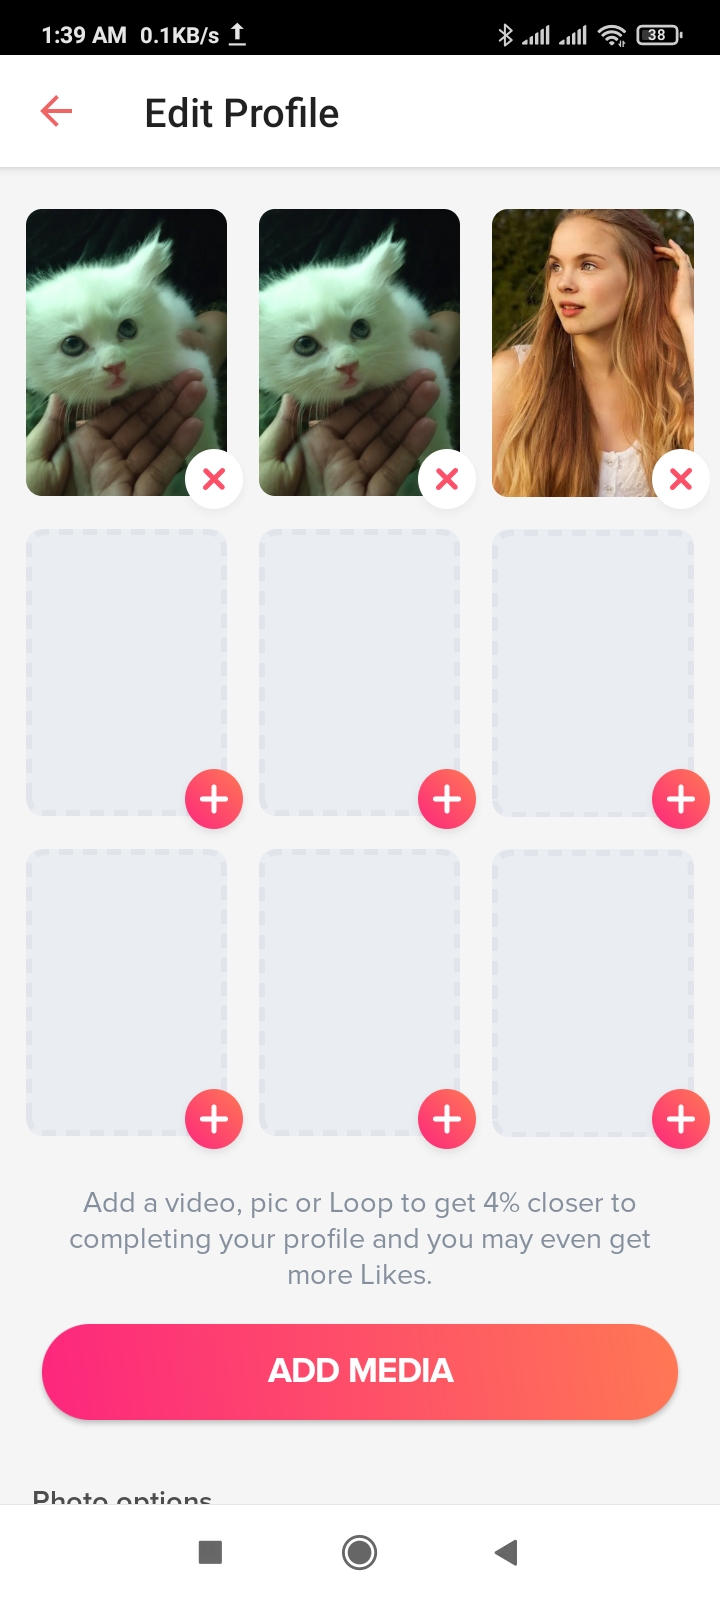 Tinder Can't Edit Profile? How to Edit Tinder Profile?